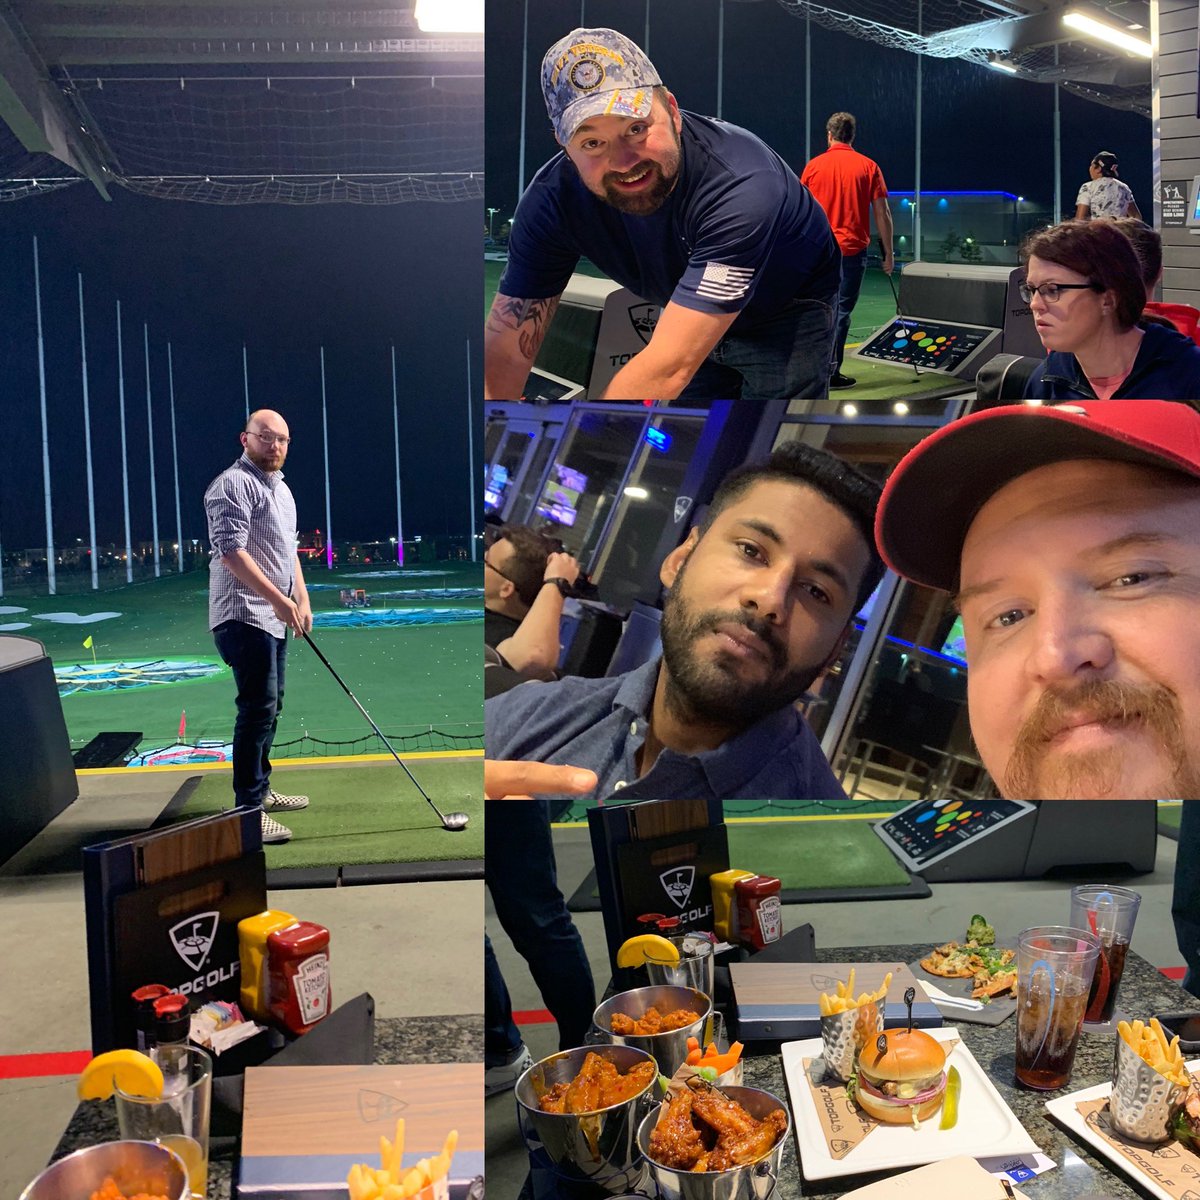 A night of team building with Rookwood squad #LifeAtATT #OHPA #cincytakeover